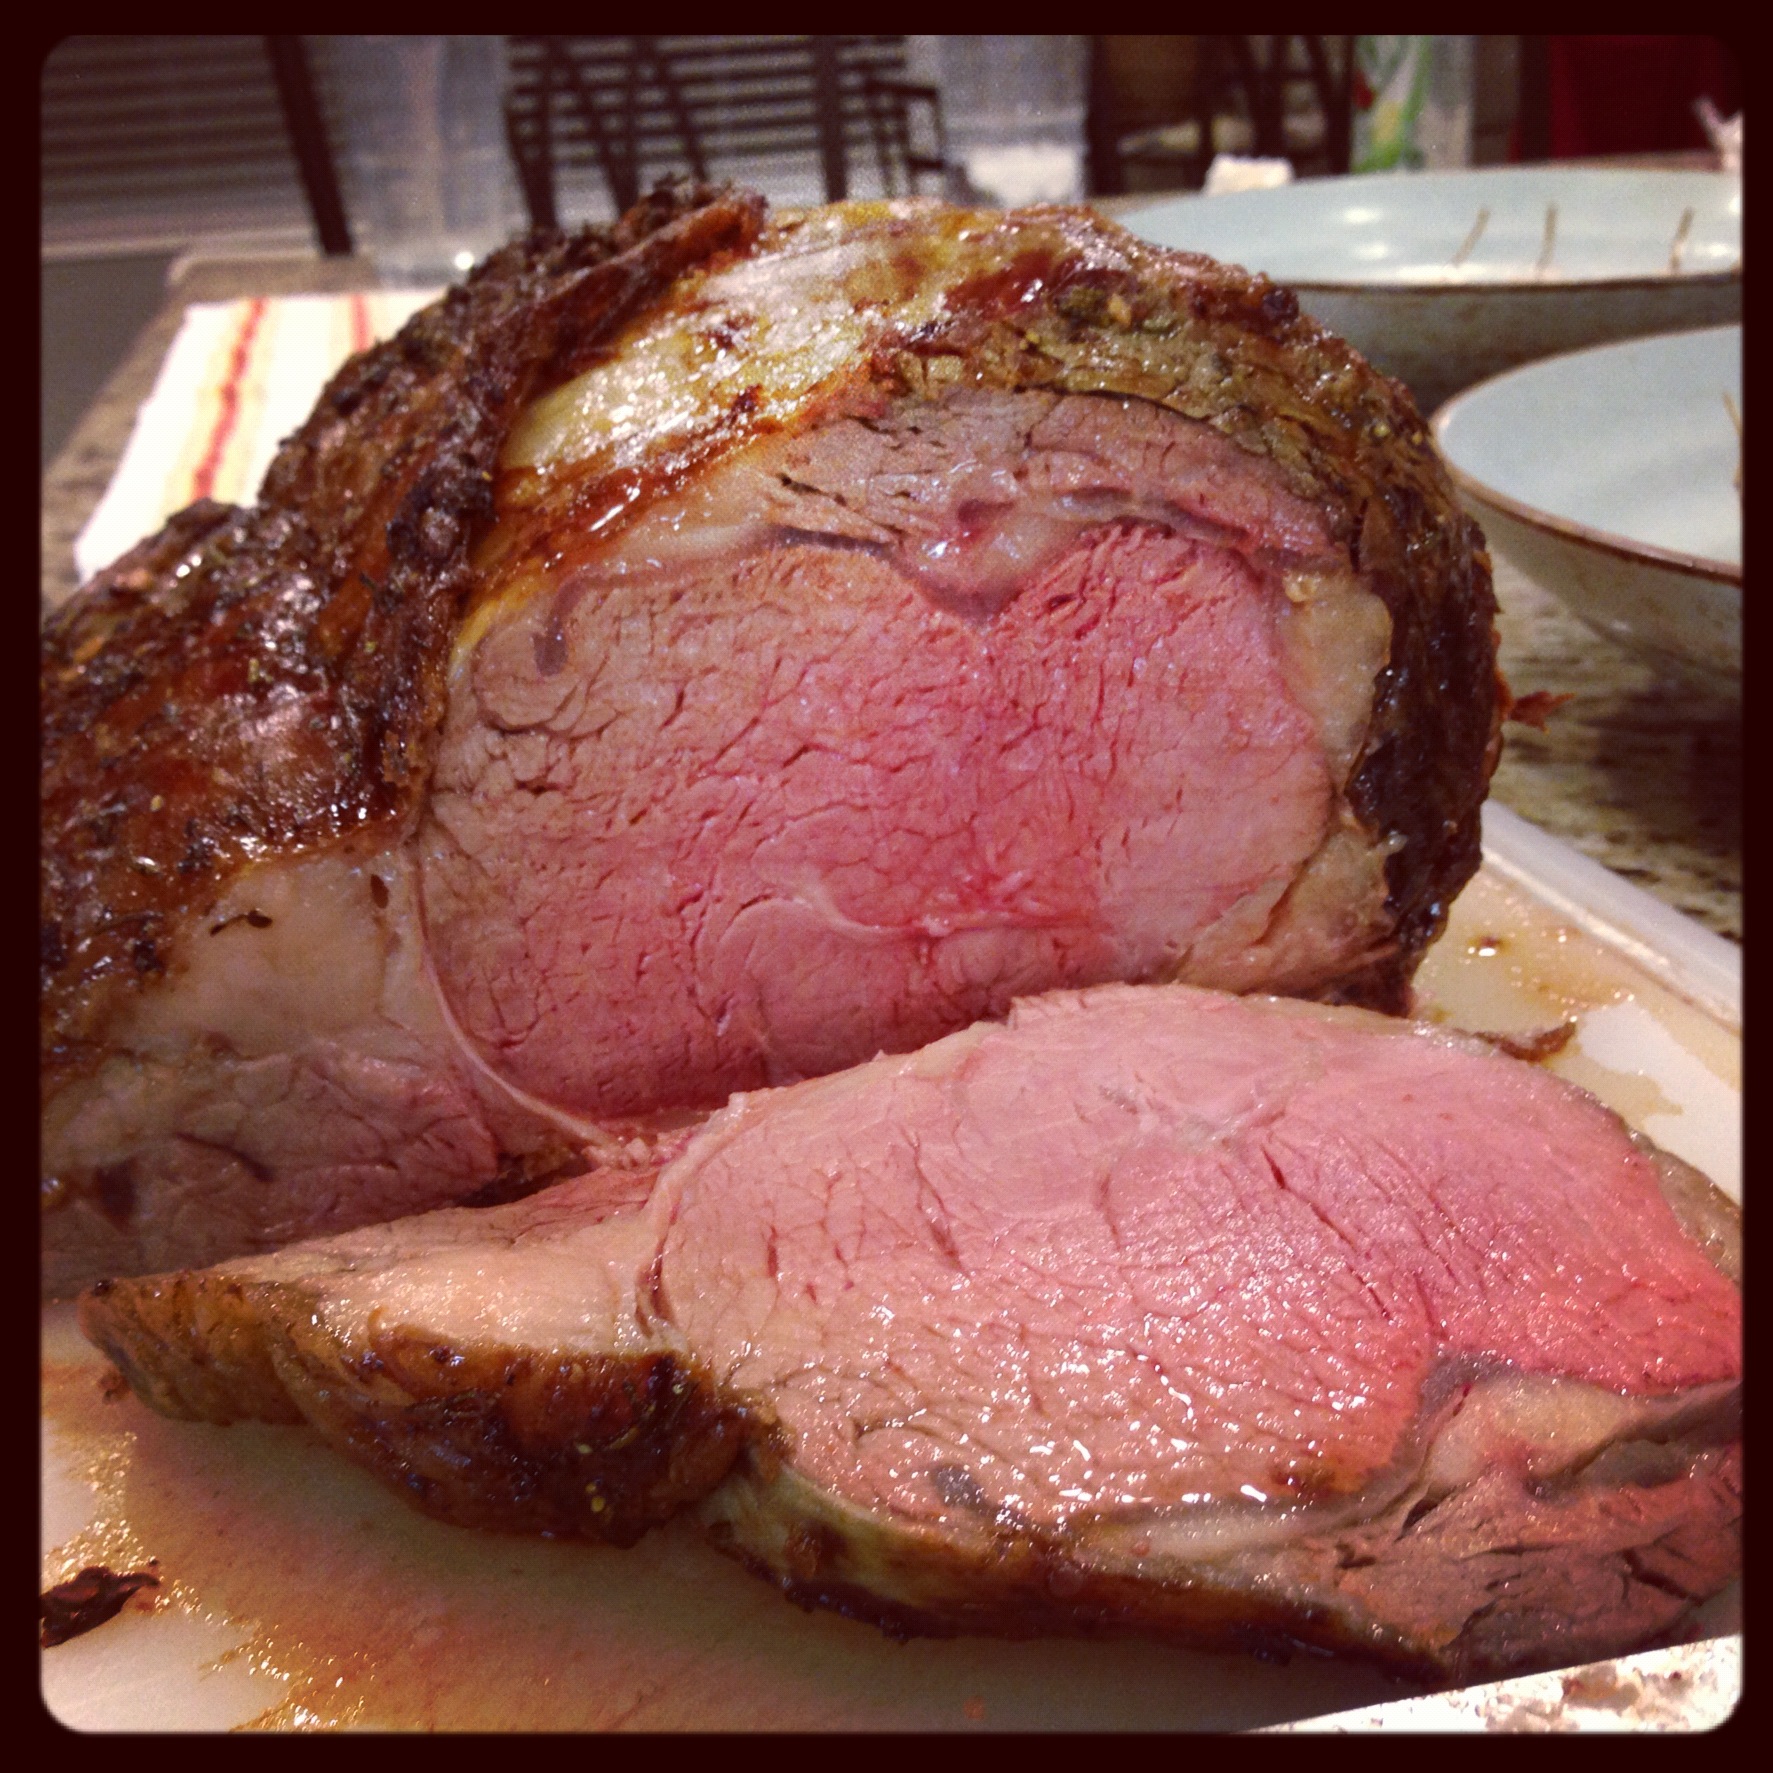 Christmas Dinner How To Make Prime Rib Standing Rib Roast With Au Jus And Yorkshire Pudding The 350 Degree Oven,Fried Green Tomatoes Meme